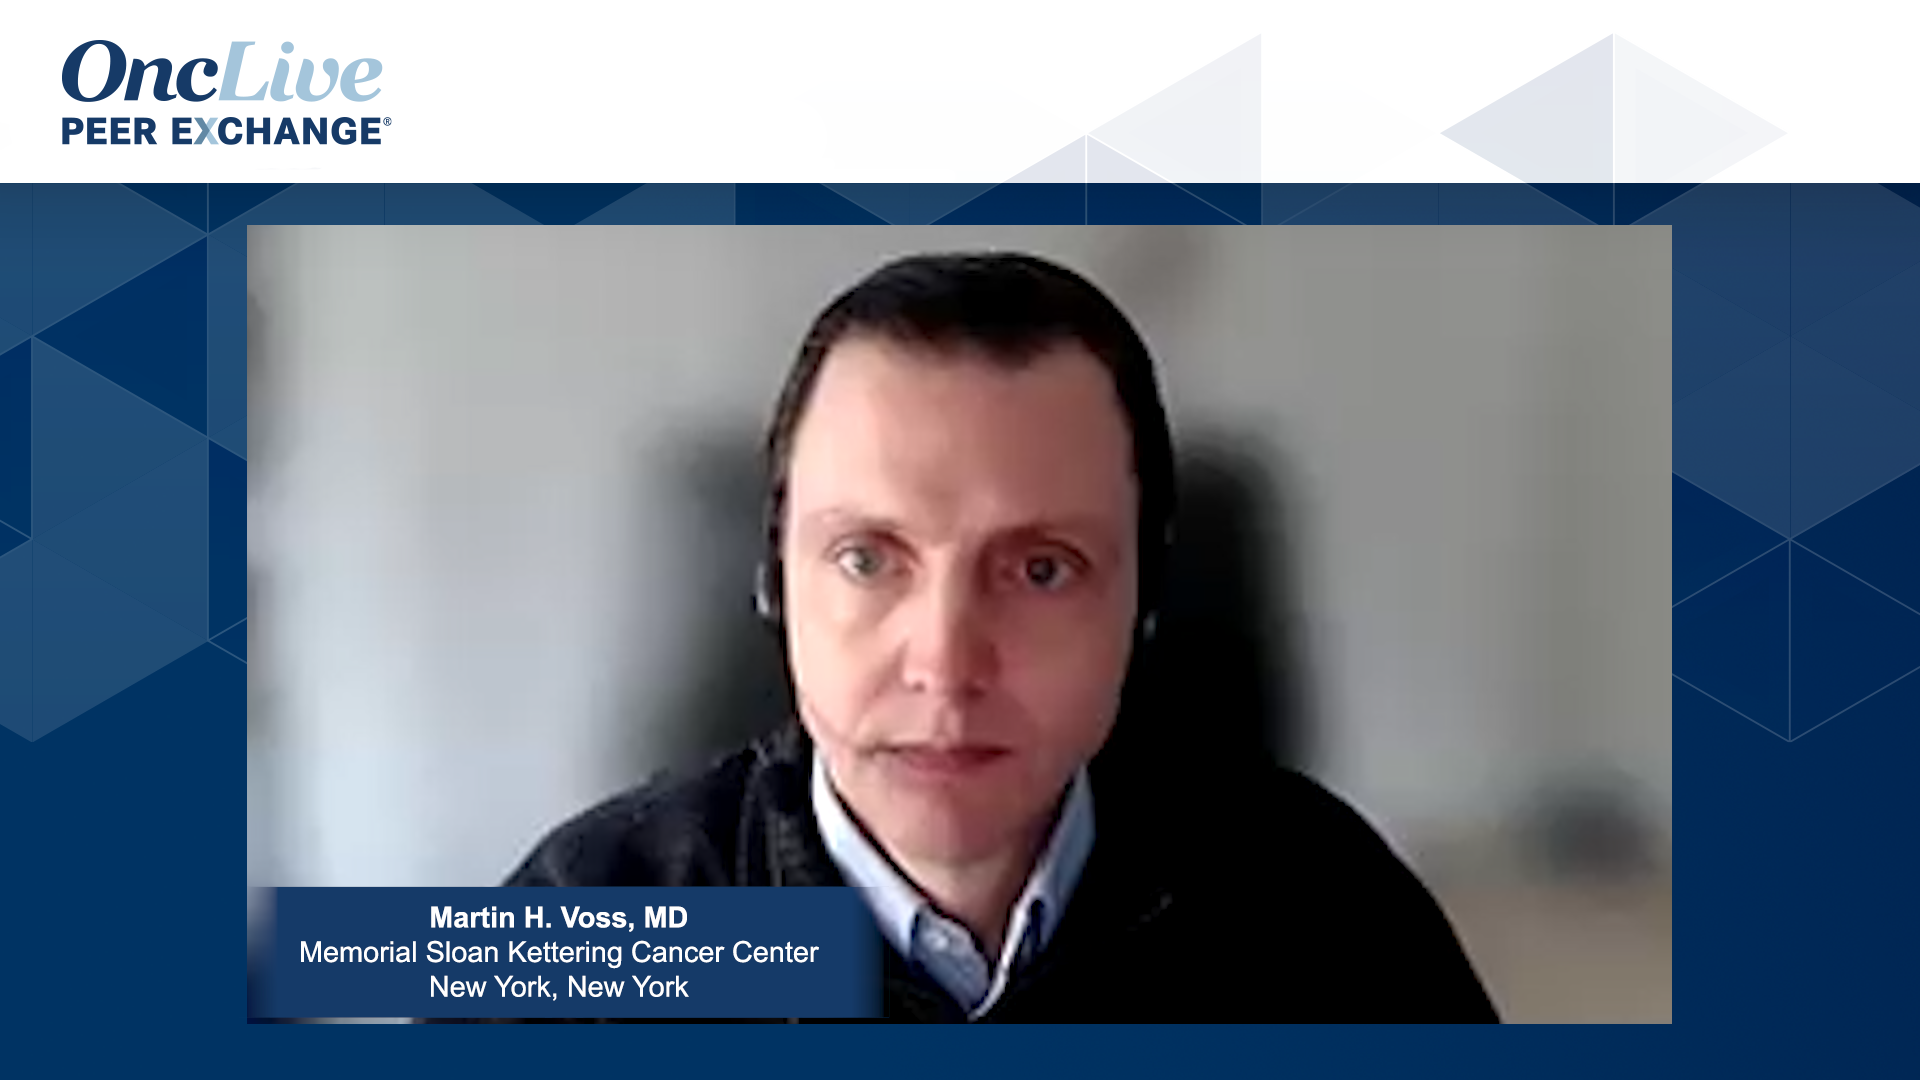 Martin H. Voss, MD, an expert on renal cell carcinoma